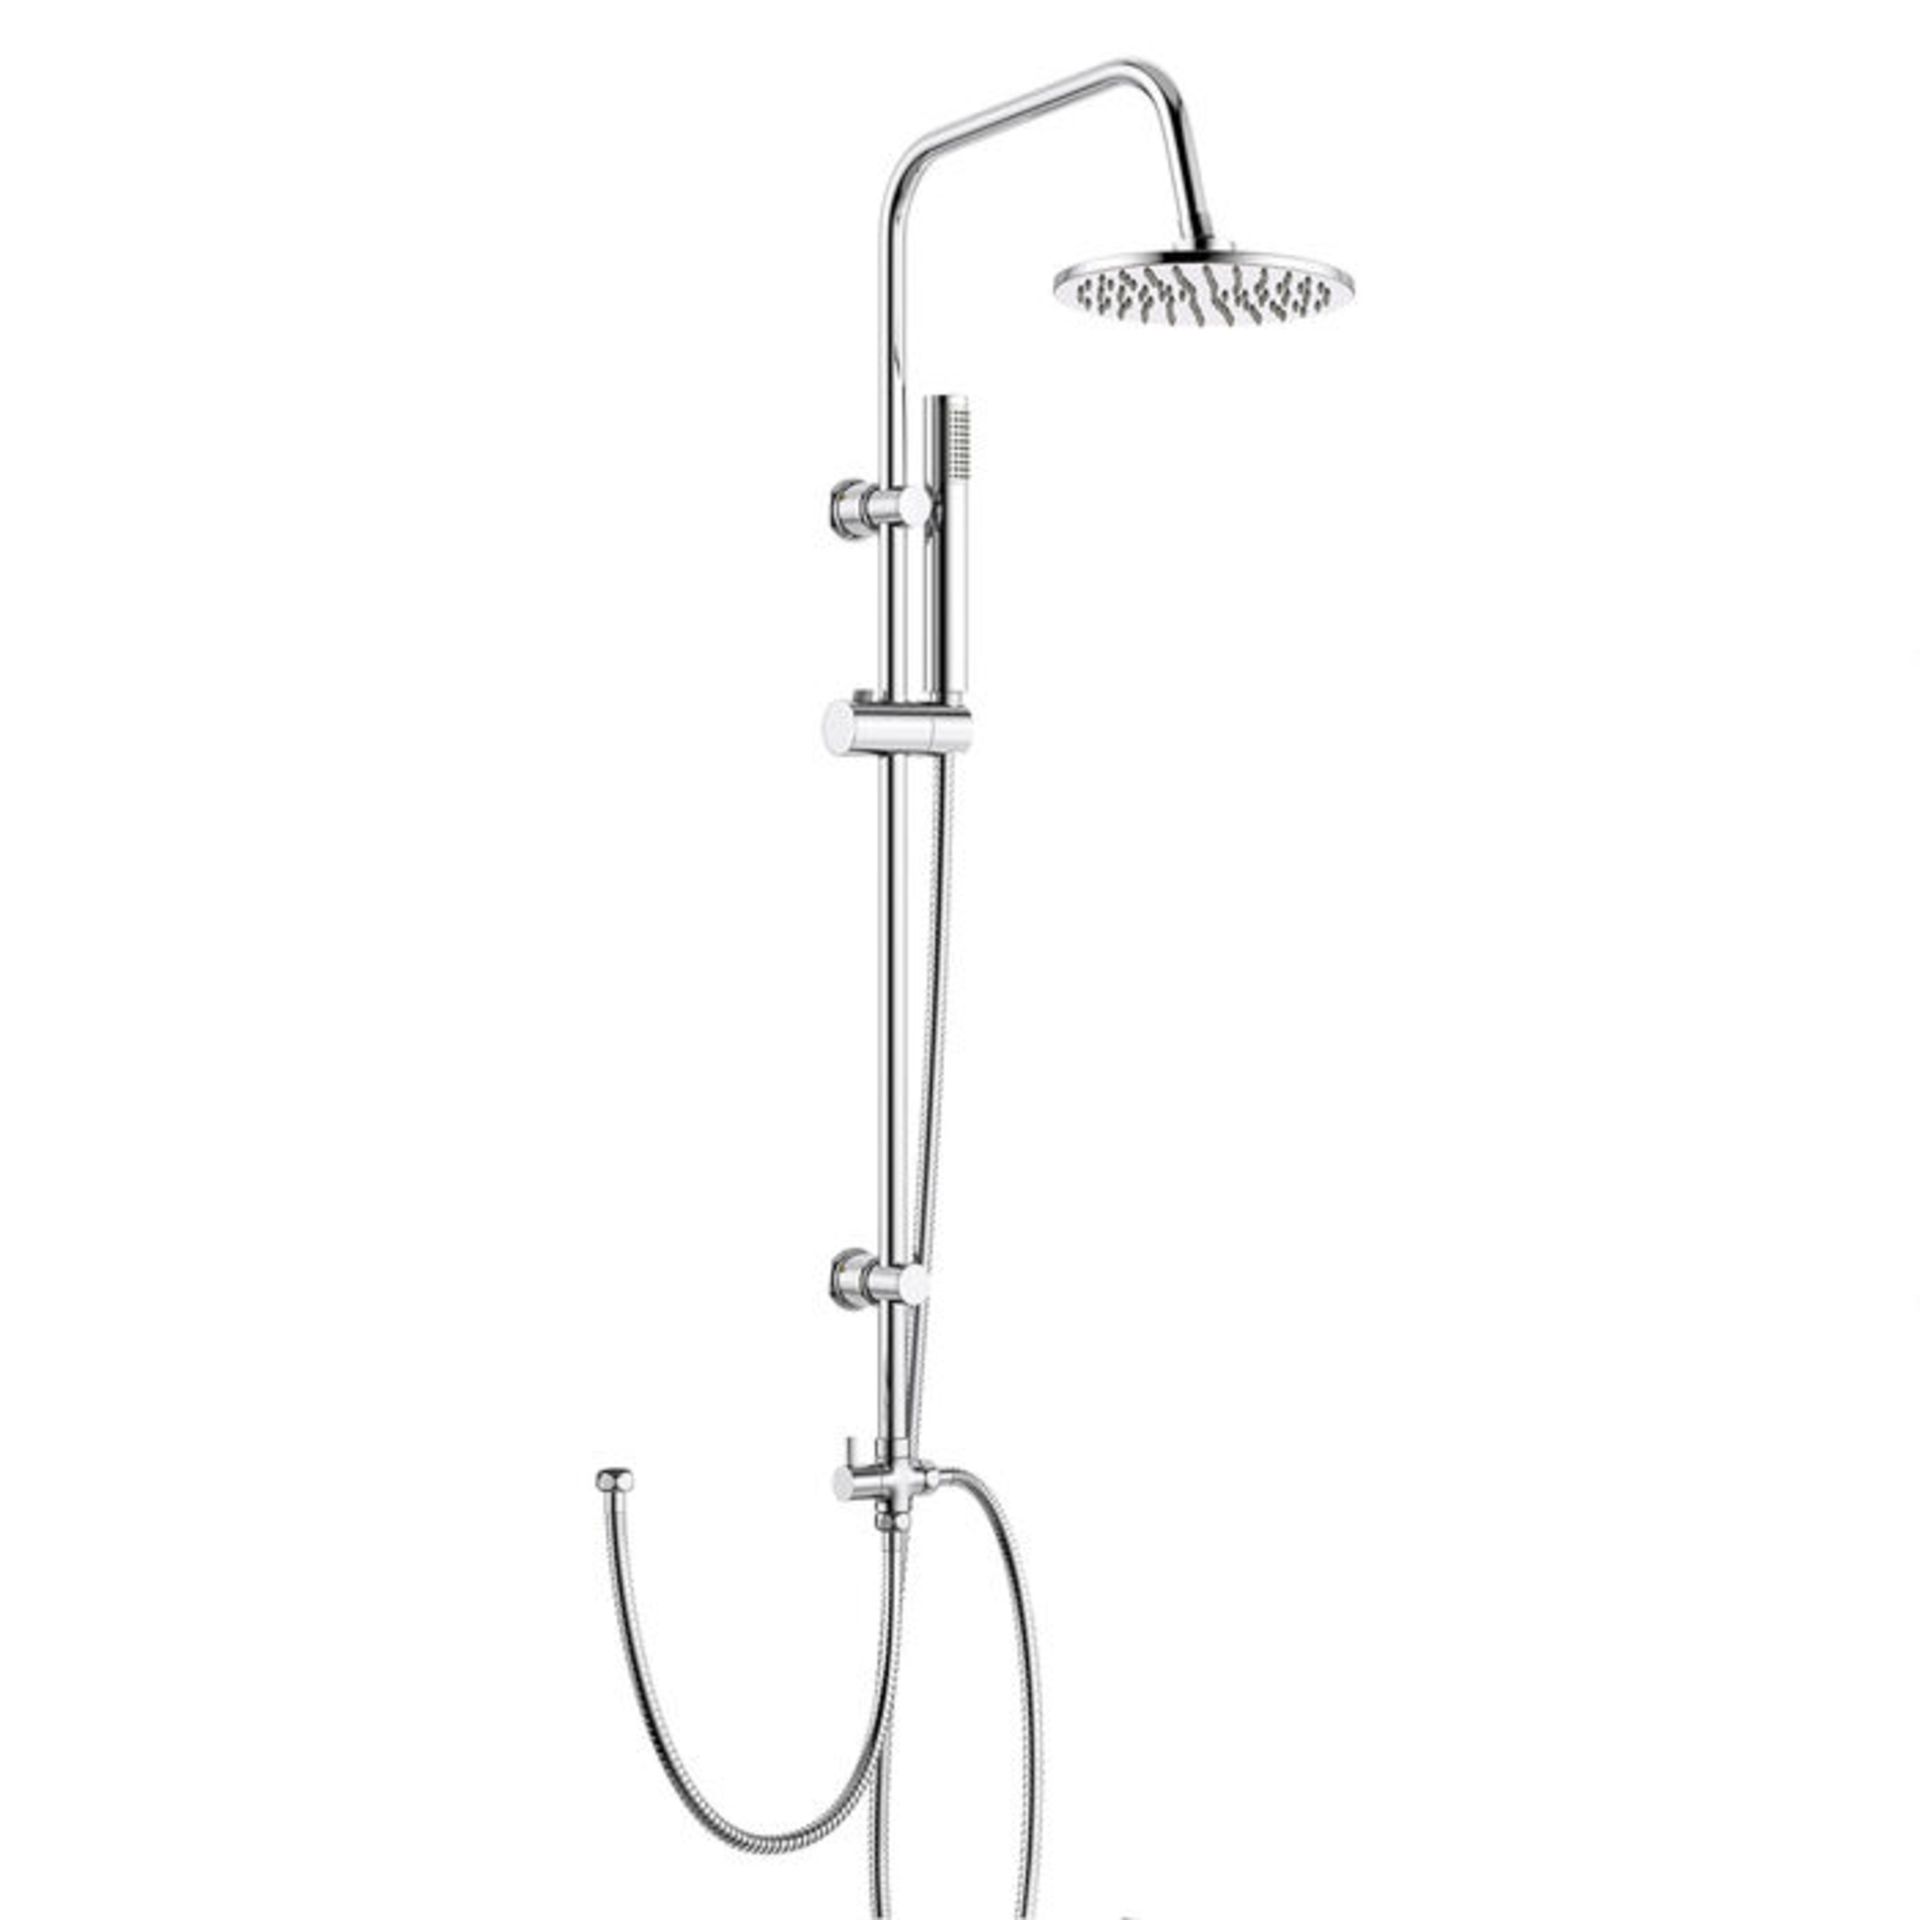 200mm Round Head, Riser Rail & Handheld Kit Quality stainless steel shower head with Easy Clea... - Image 2 of 4